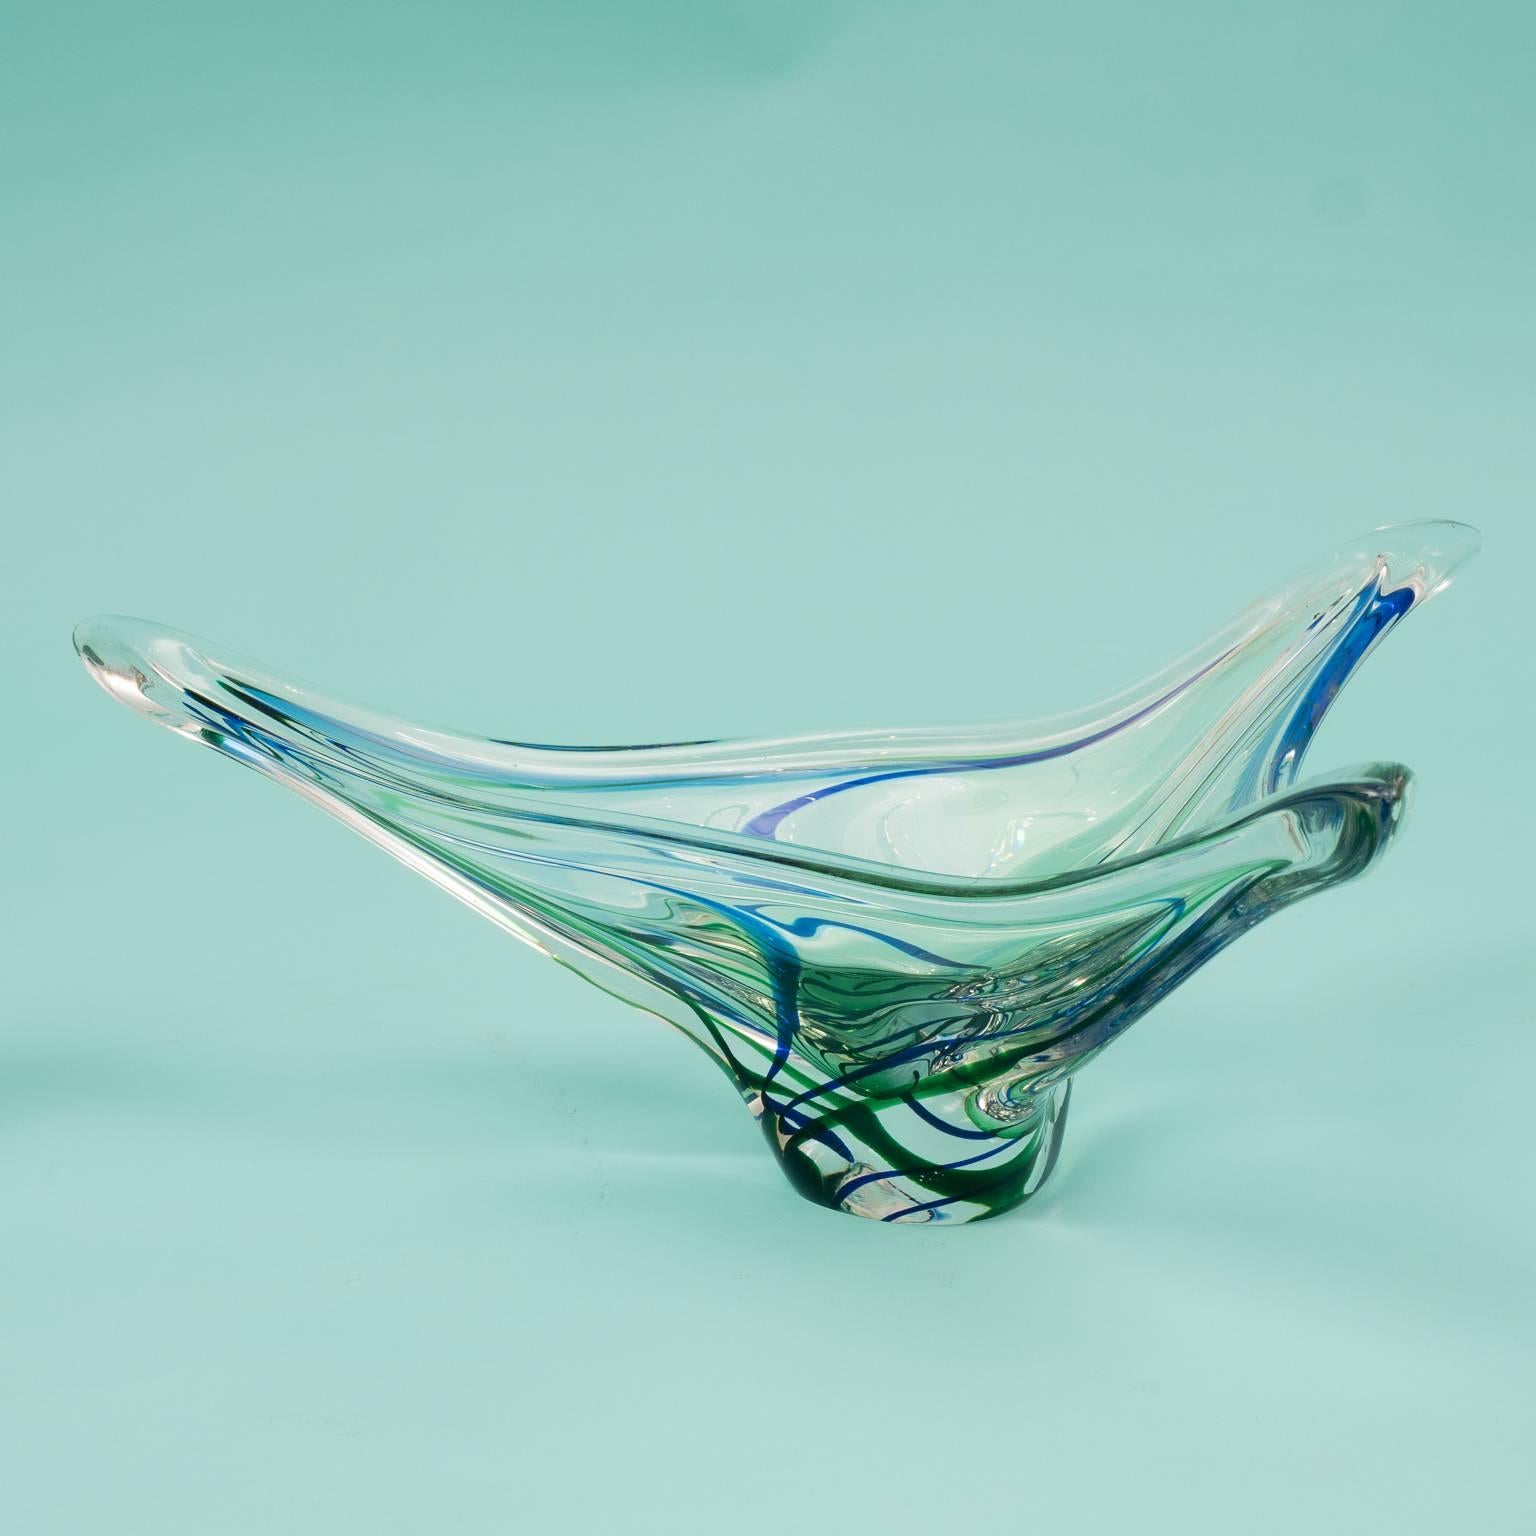 High-quality bowl from the 1960s by Max Verboeket for Kristalunie Maastricht. Smoothed glass with bicolored pattern in blue and green.

Very good condition.